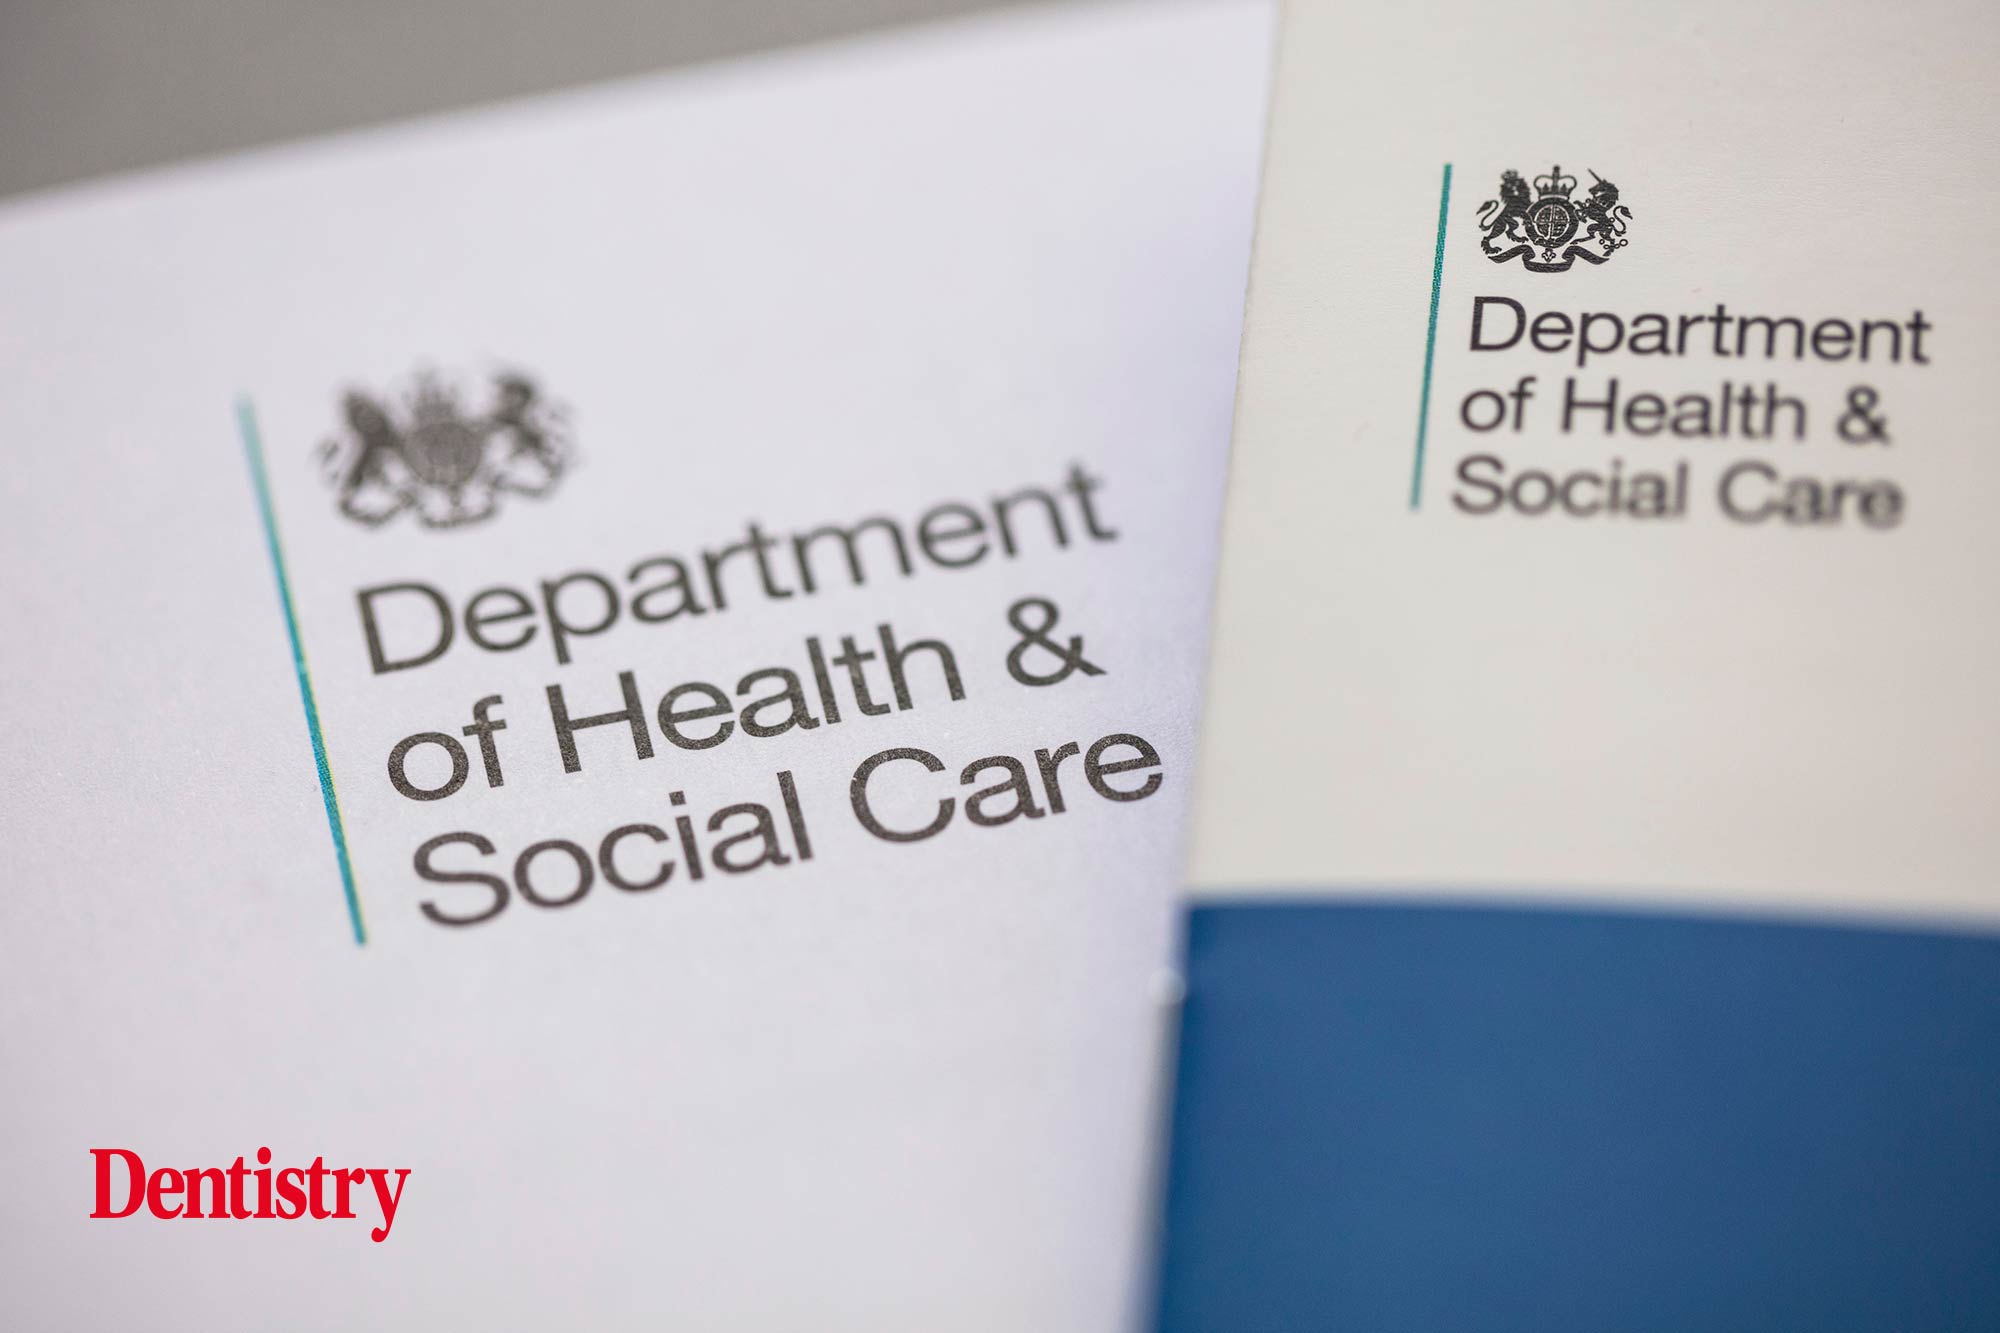 Health Secretary's latest statement fails to mention dentistry